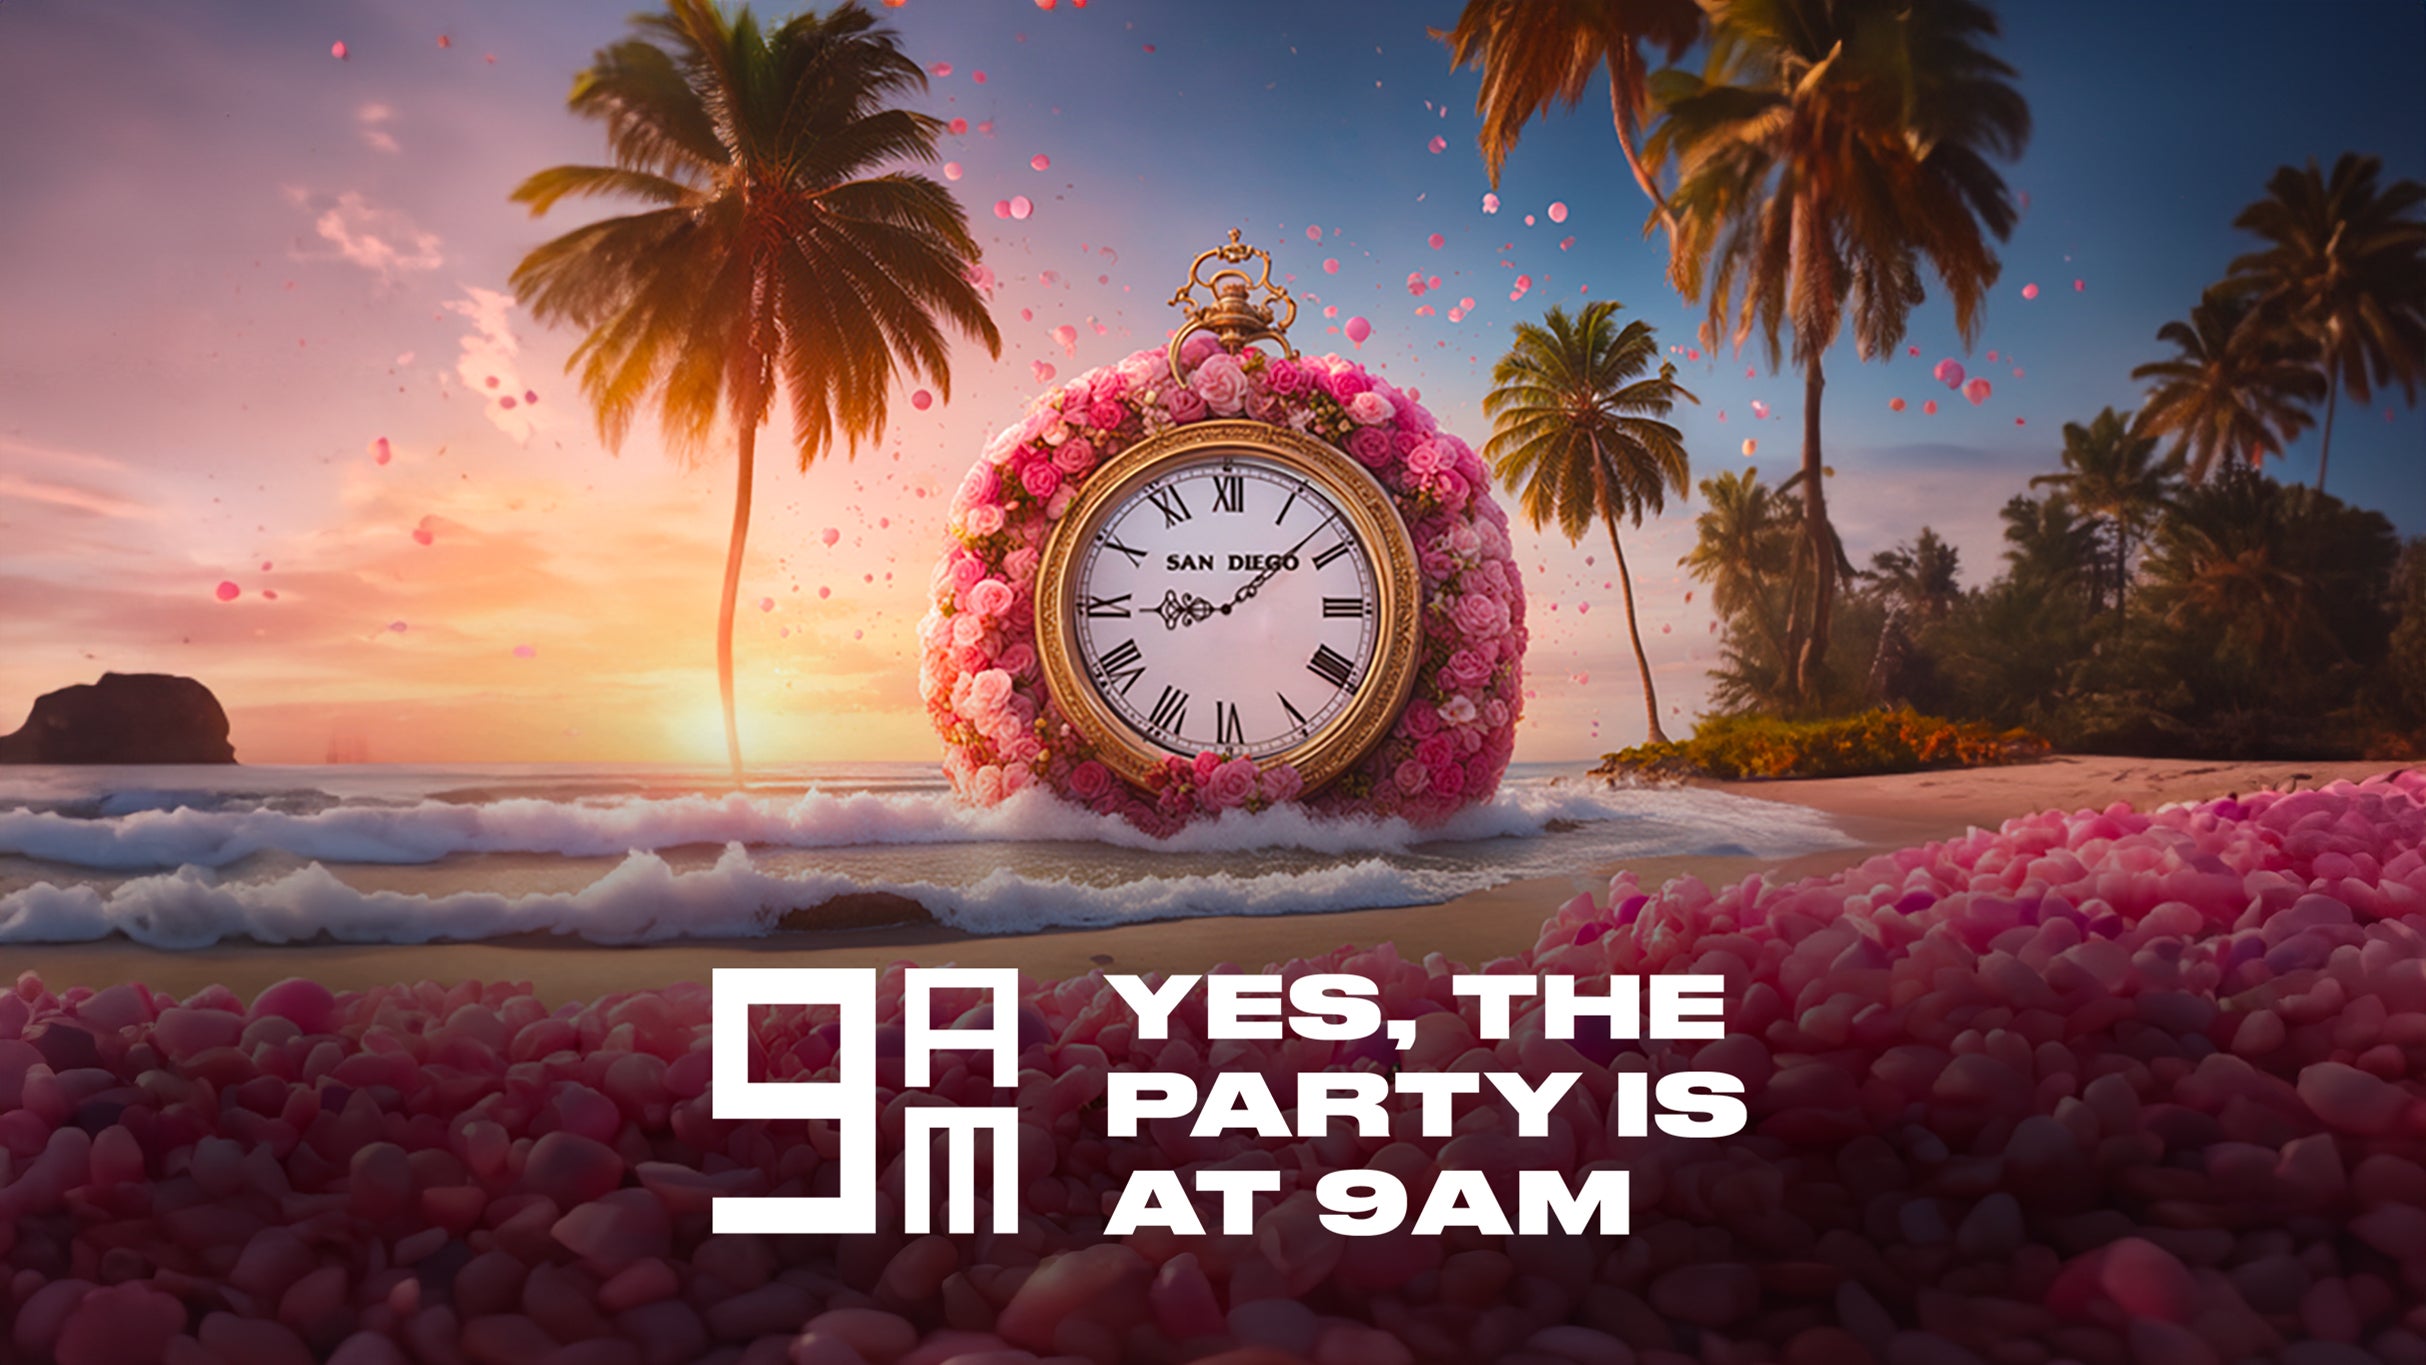 THE 9AM BANGER Presents: Rise and Rose'! Yes, The Party is at 9AM! 21+ in San Diego promo photo for 4 Pack  presale offer code